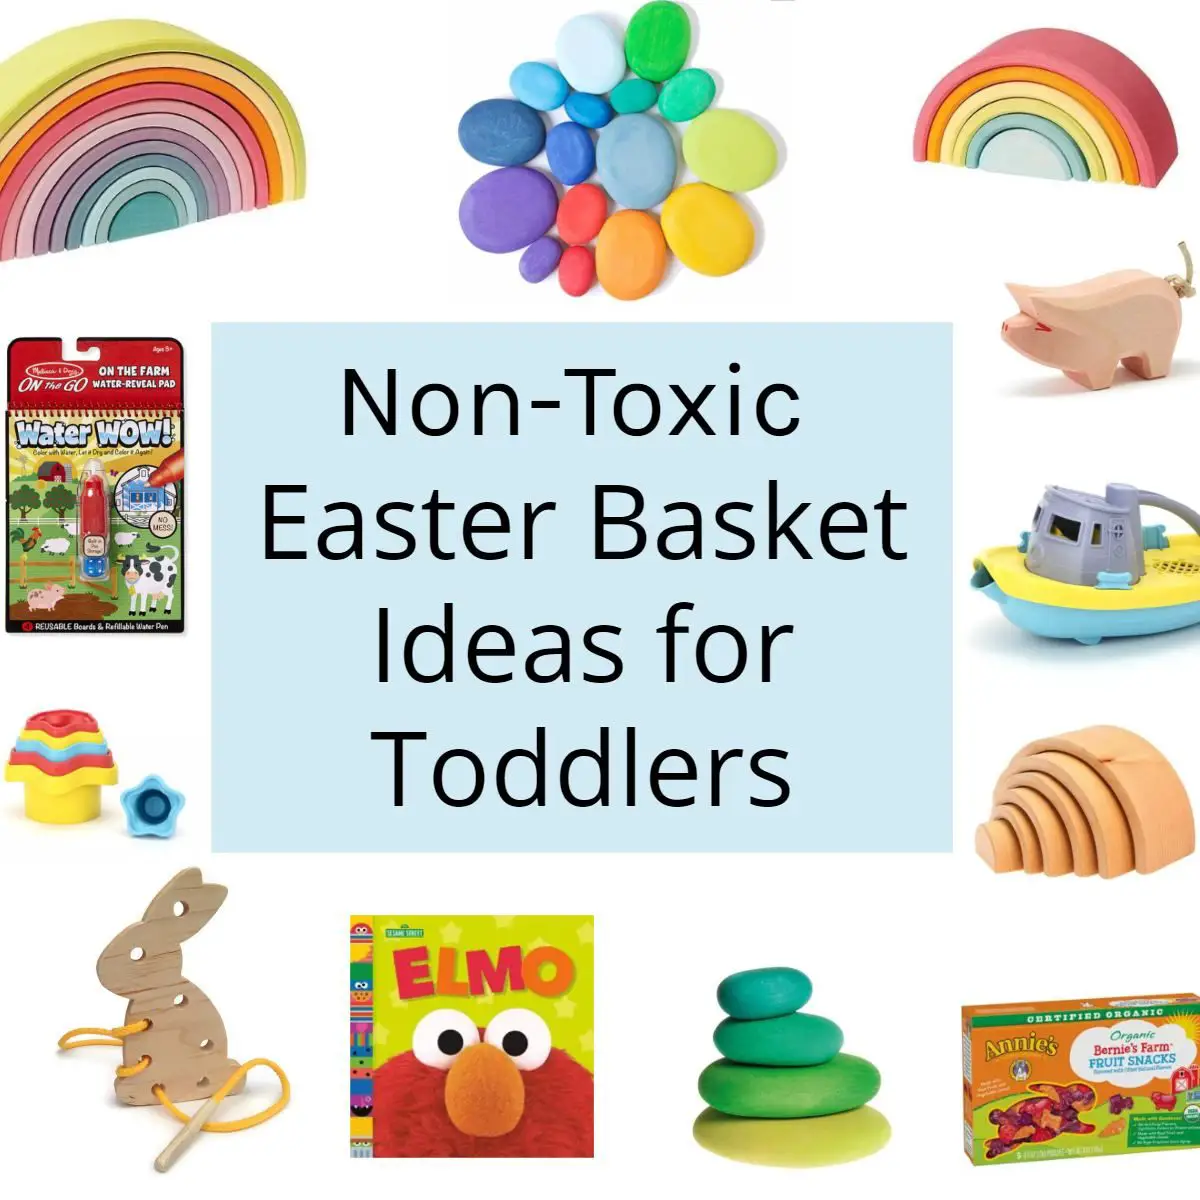 Nontoxic Easter Basket Ideas for Toddlers